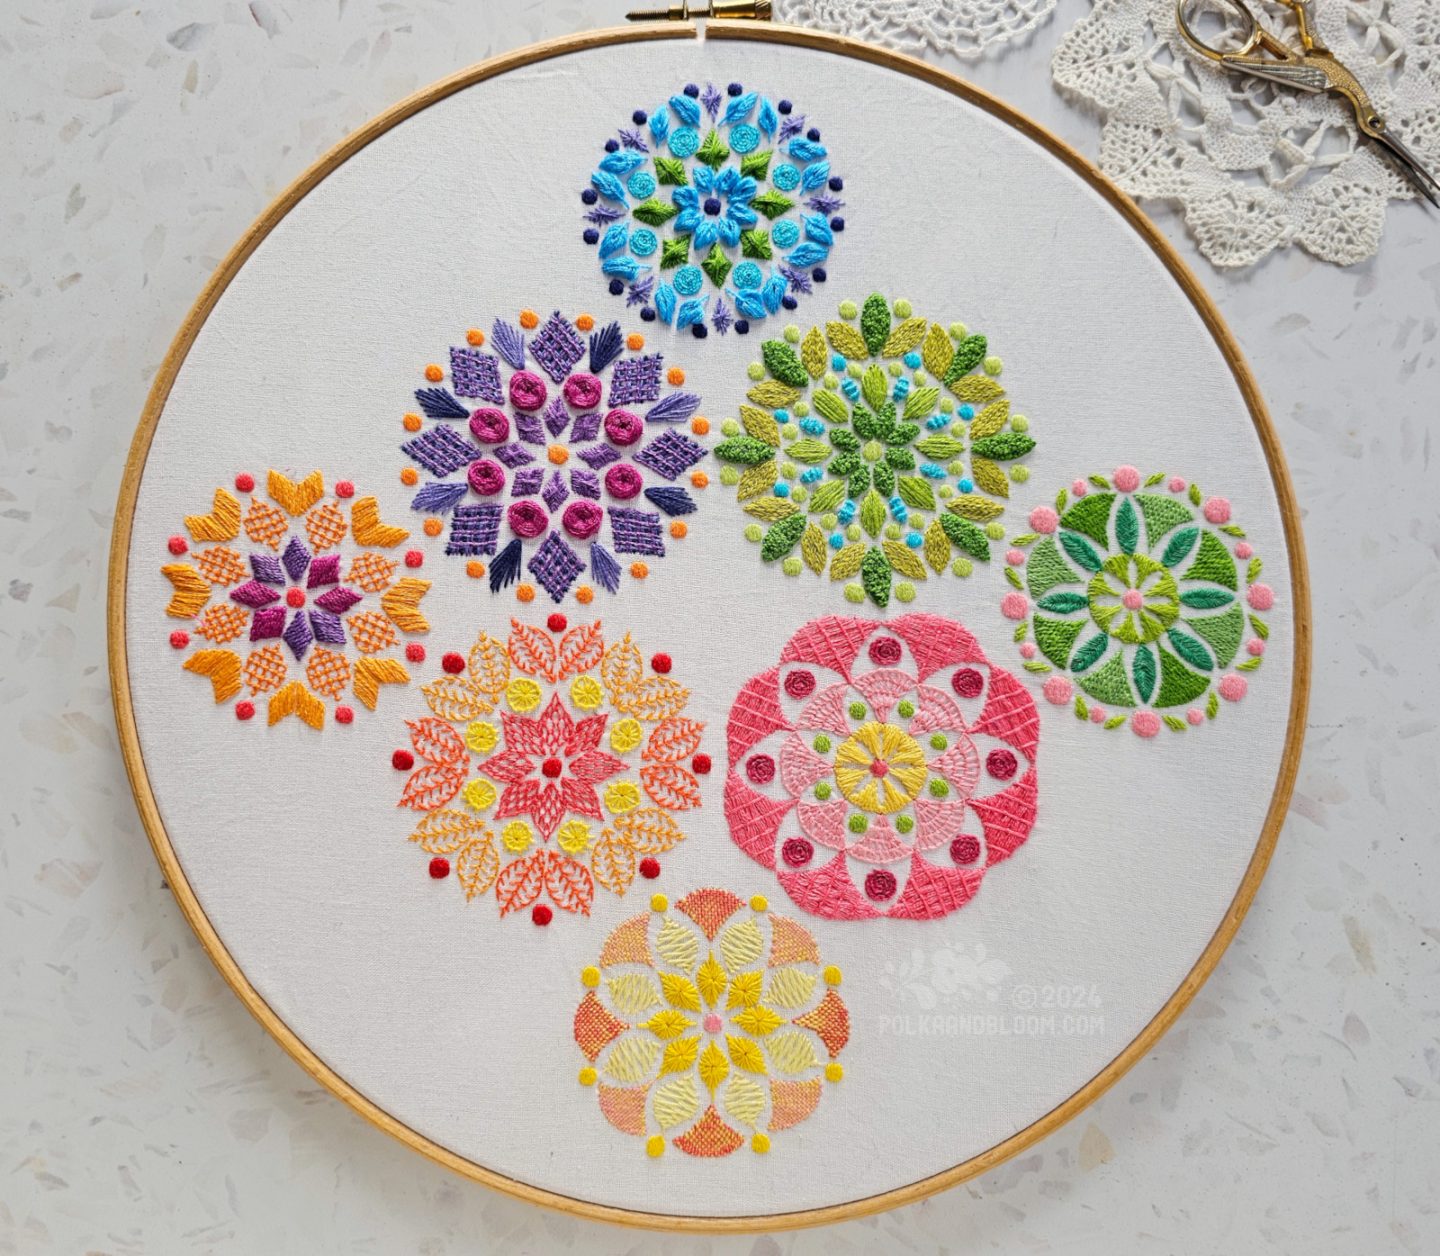 Overhead view of a large wooden embroidery hoop with white fabric. On the fabric are embroidered eight small mandala inspired designs, each in a different dominant colour: blue, lime green, spring green, pink, yellow, orange yellow, orange and purple.